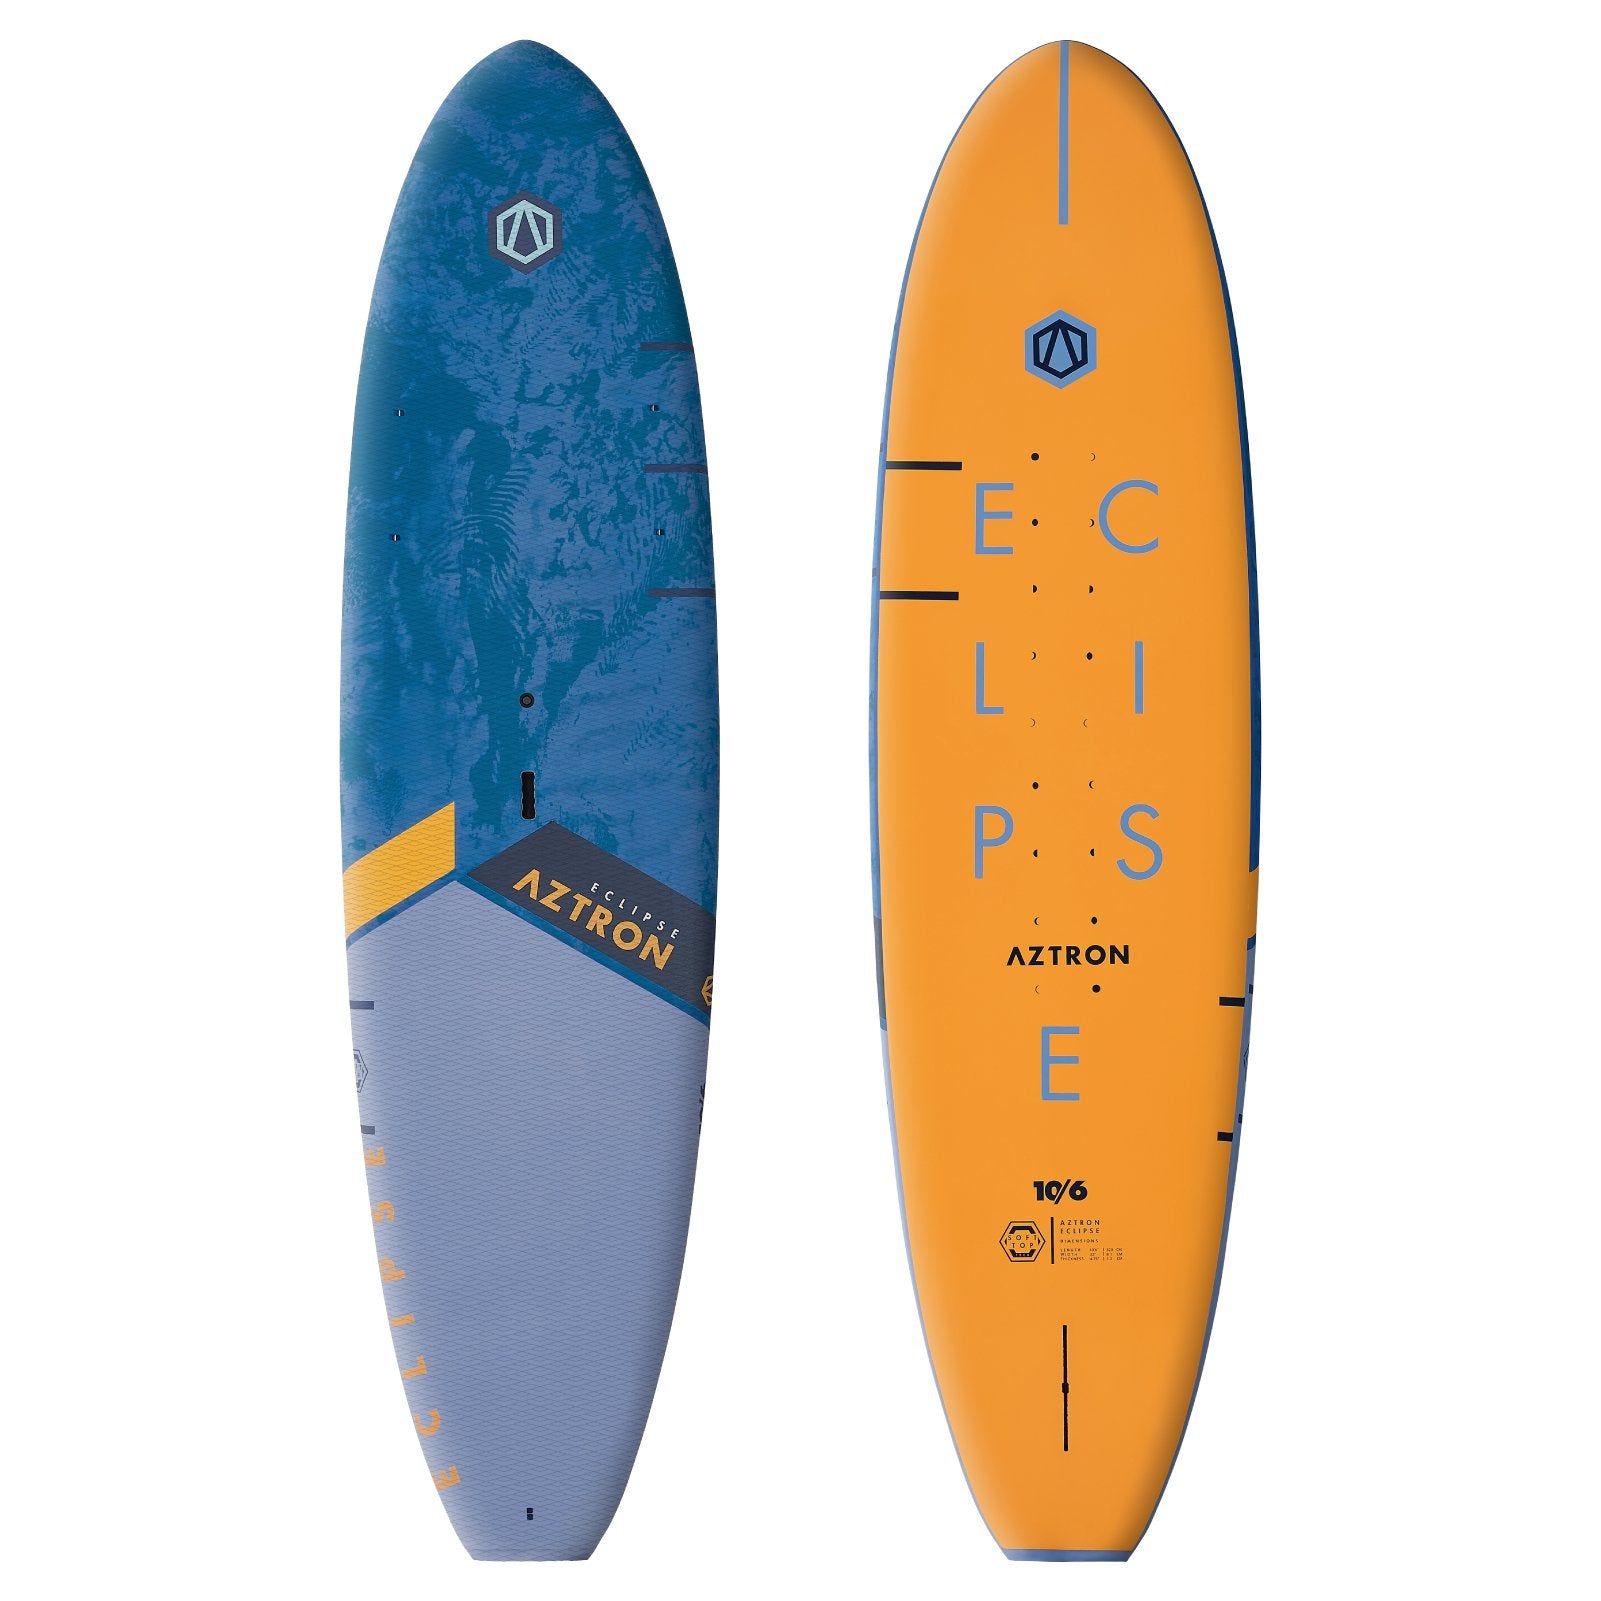 Aztron ECLIPSE 10'6" Soft Top Technology - Worthing Watersports - AH-302 - Aztron